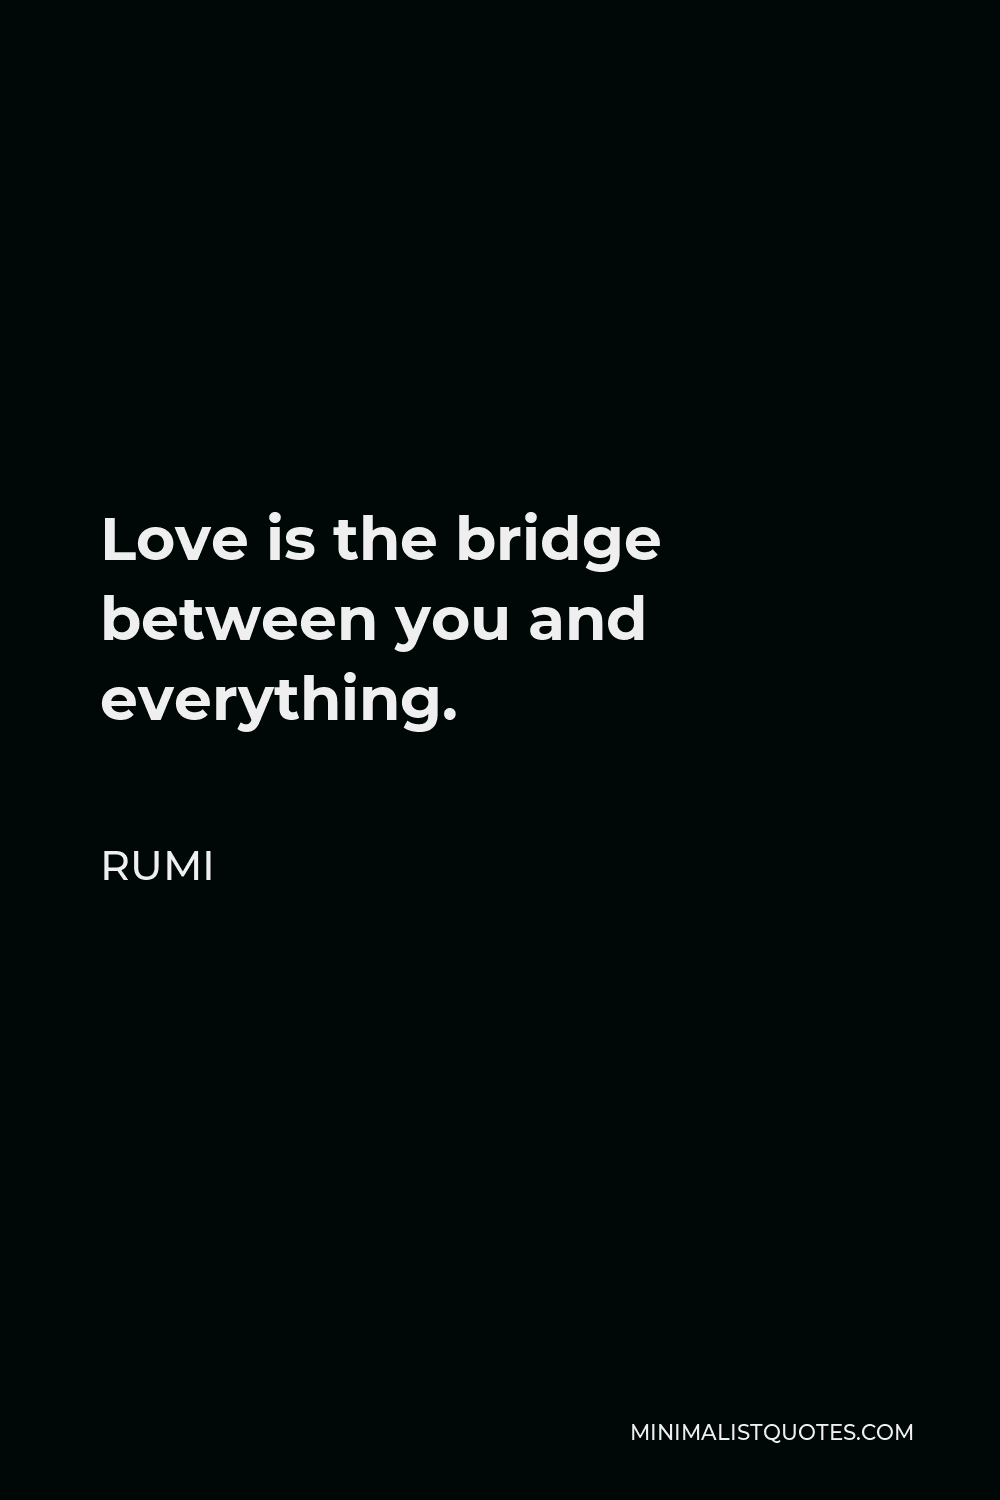 Rumi Quote - Love is the bridge between you and everything.